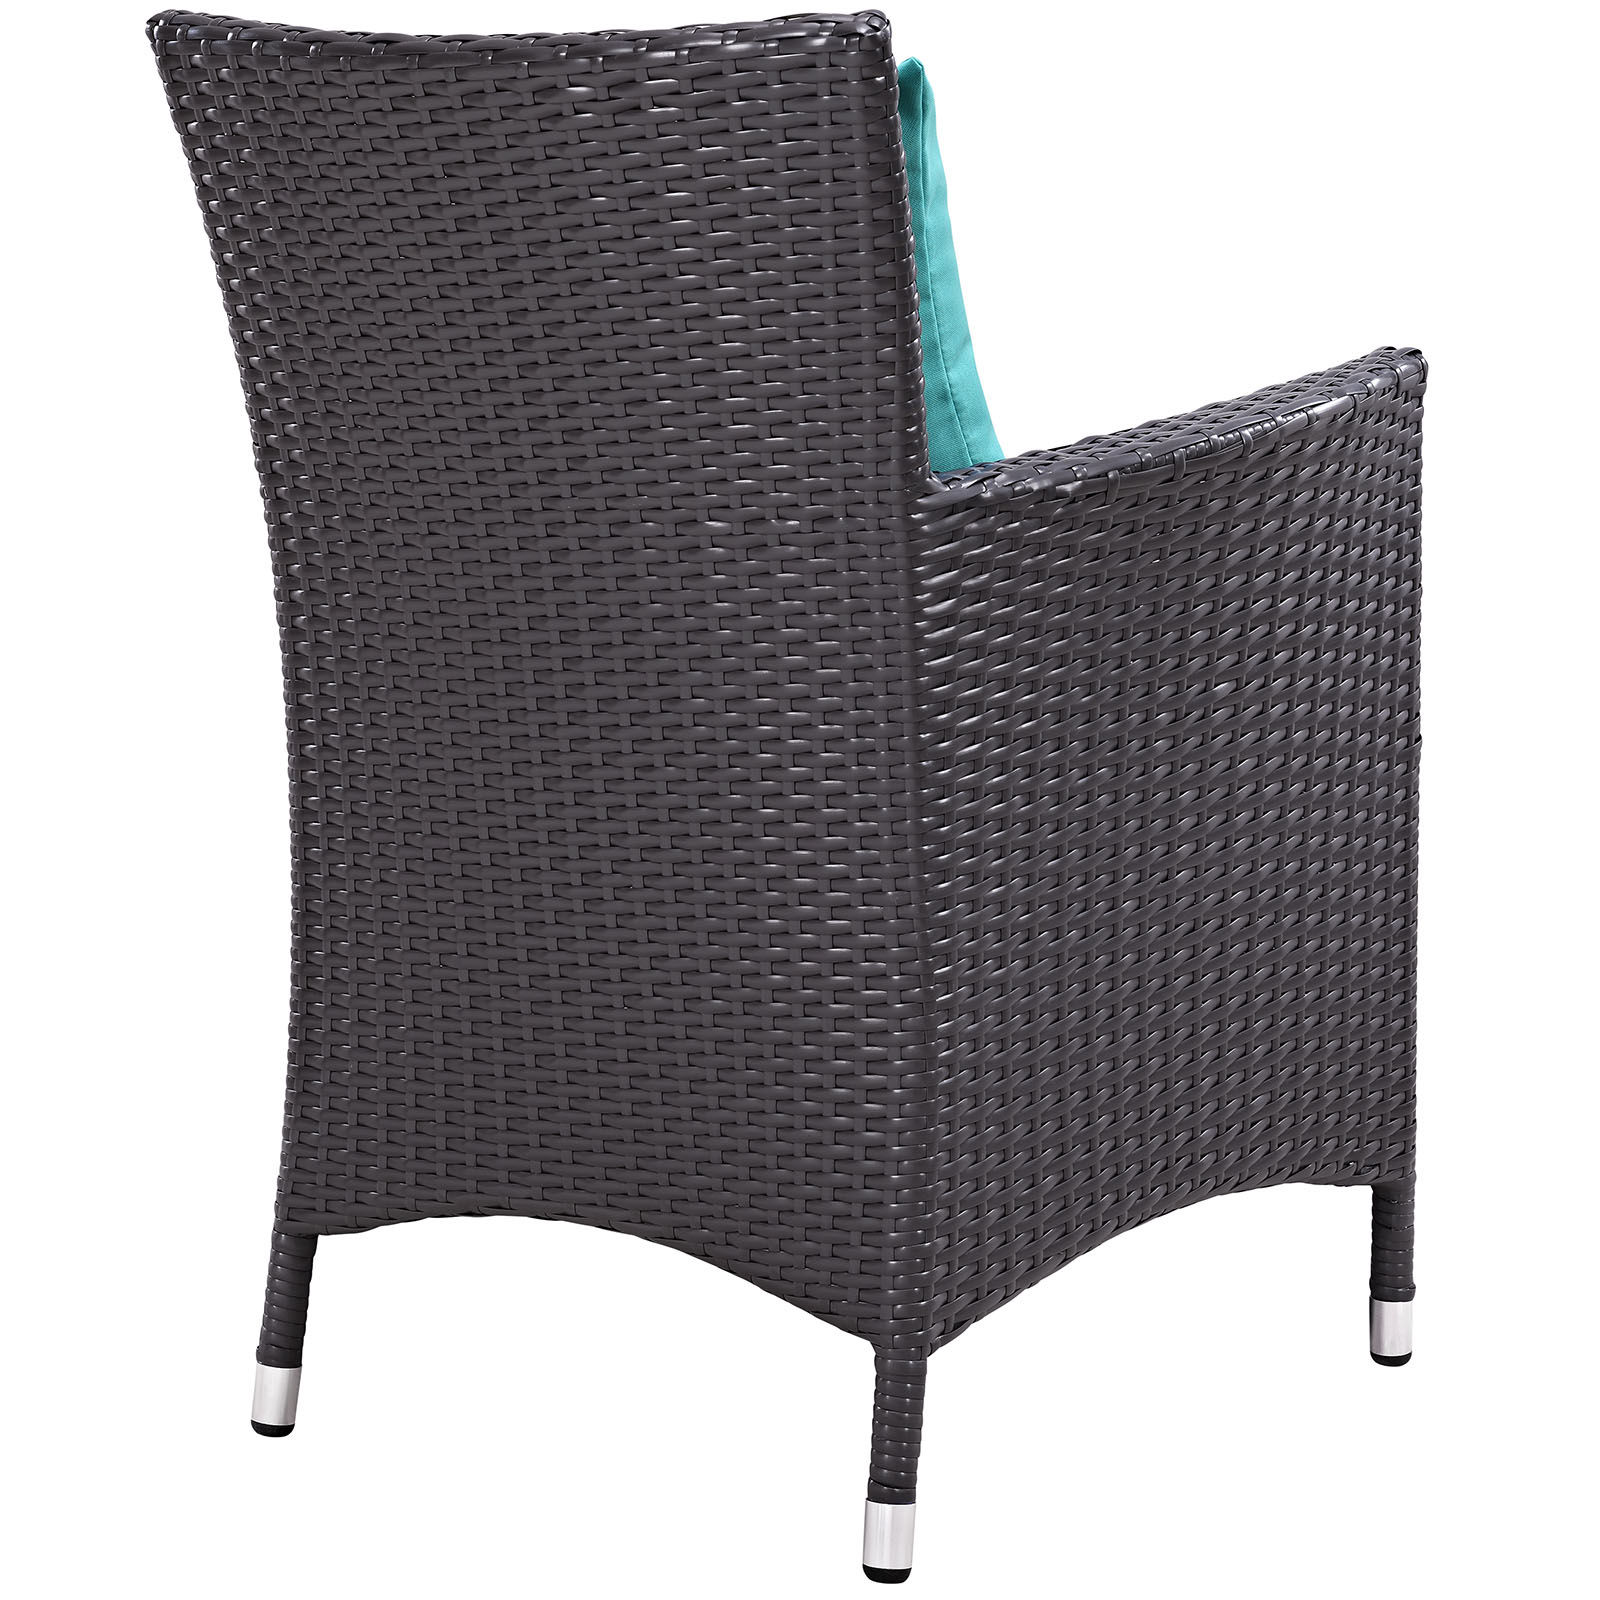 Modway Convene 8 Piece Outdoor Patio Dining Set in Espresso Turquoise - image 5 of 6